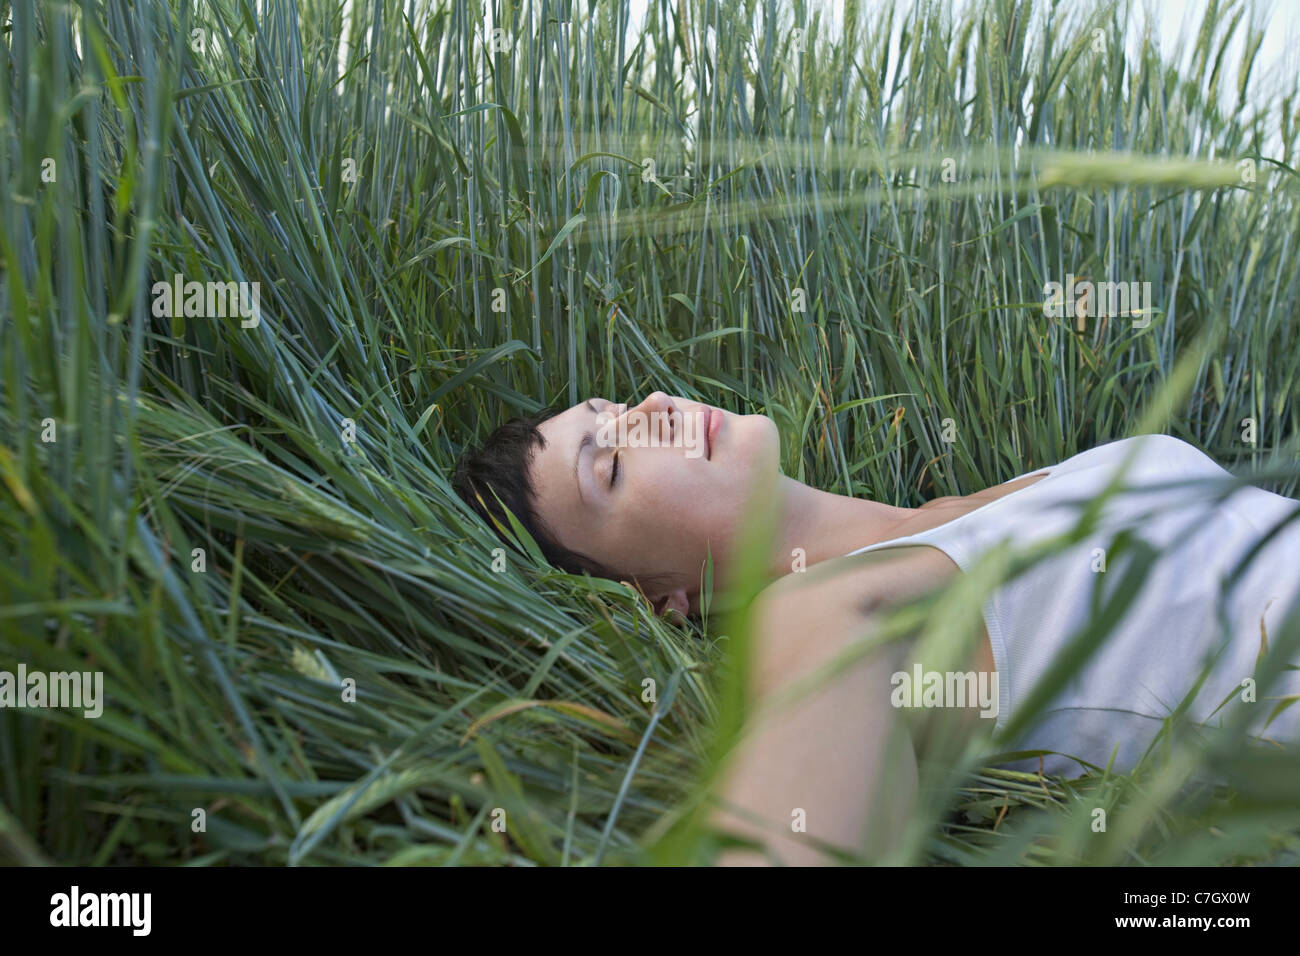 A woman sleeping in grass Stock Photo